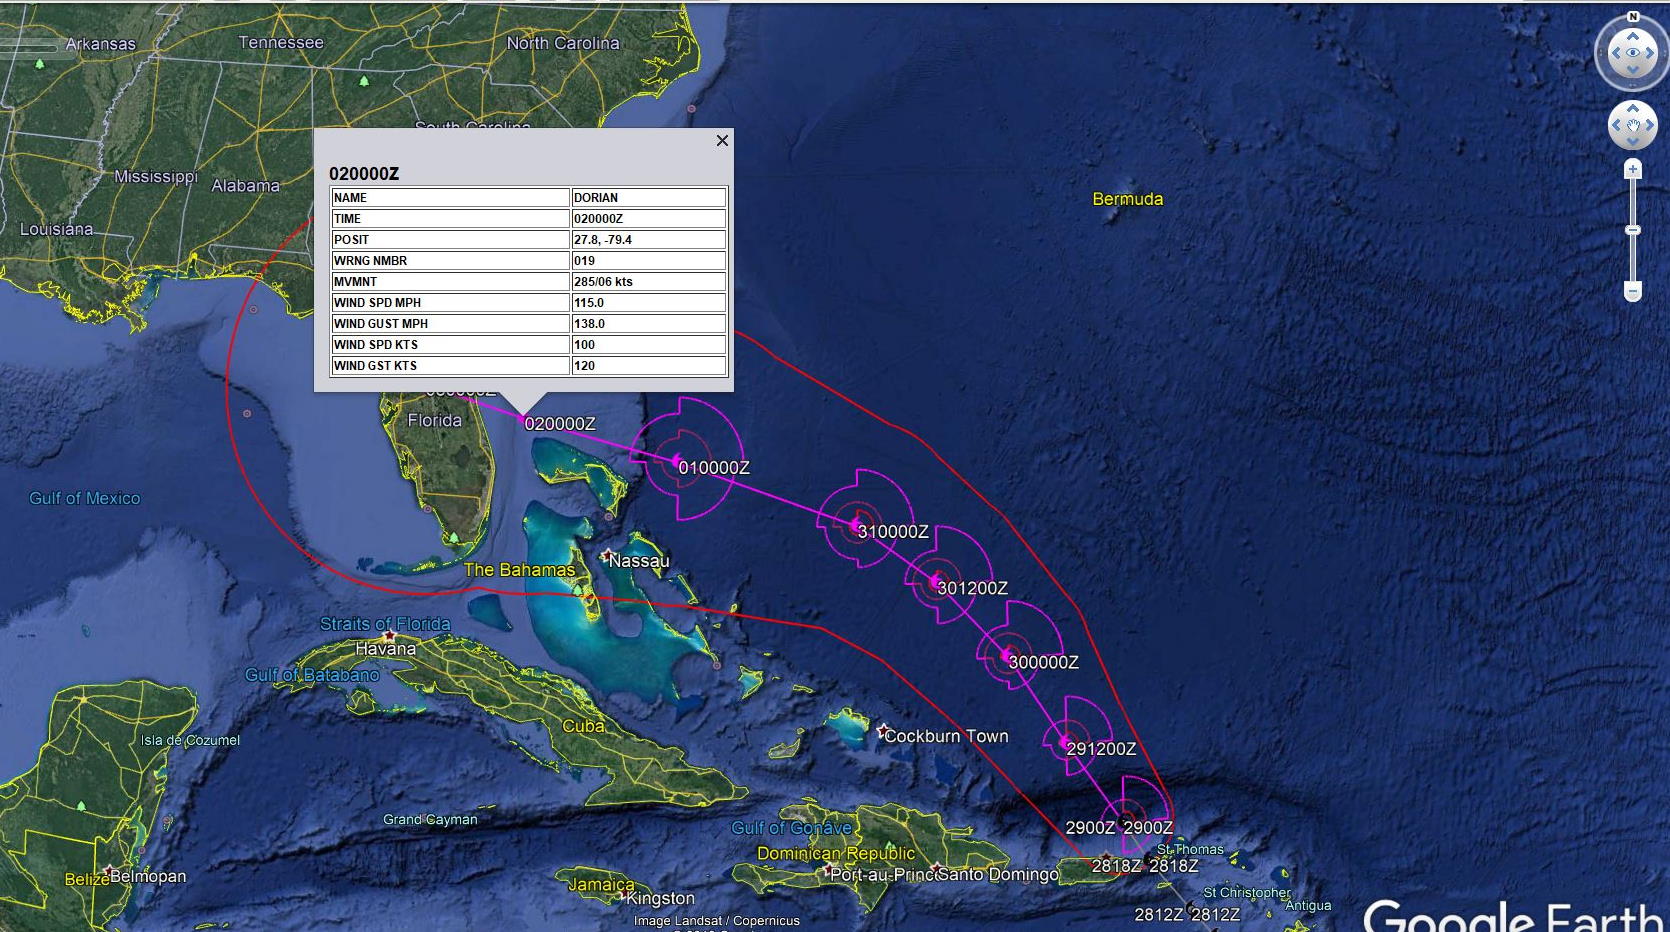 Hurricane DORIAN(05L) forecast to become a serious threat to Florida after 72h